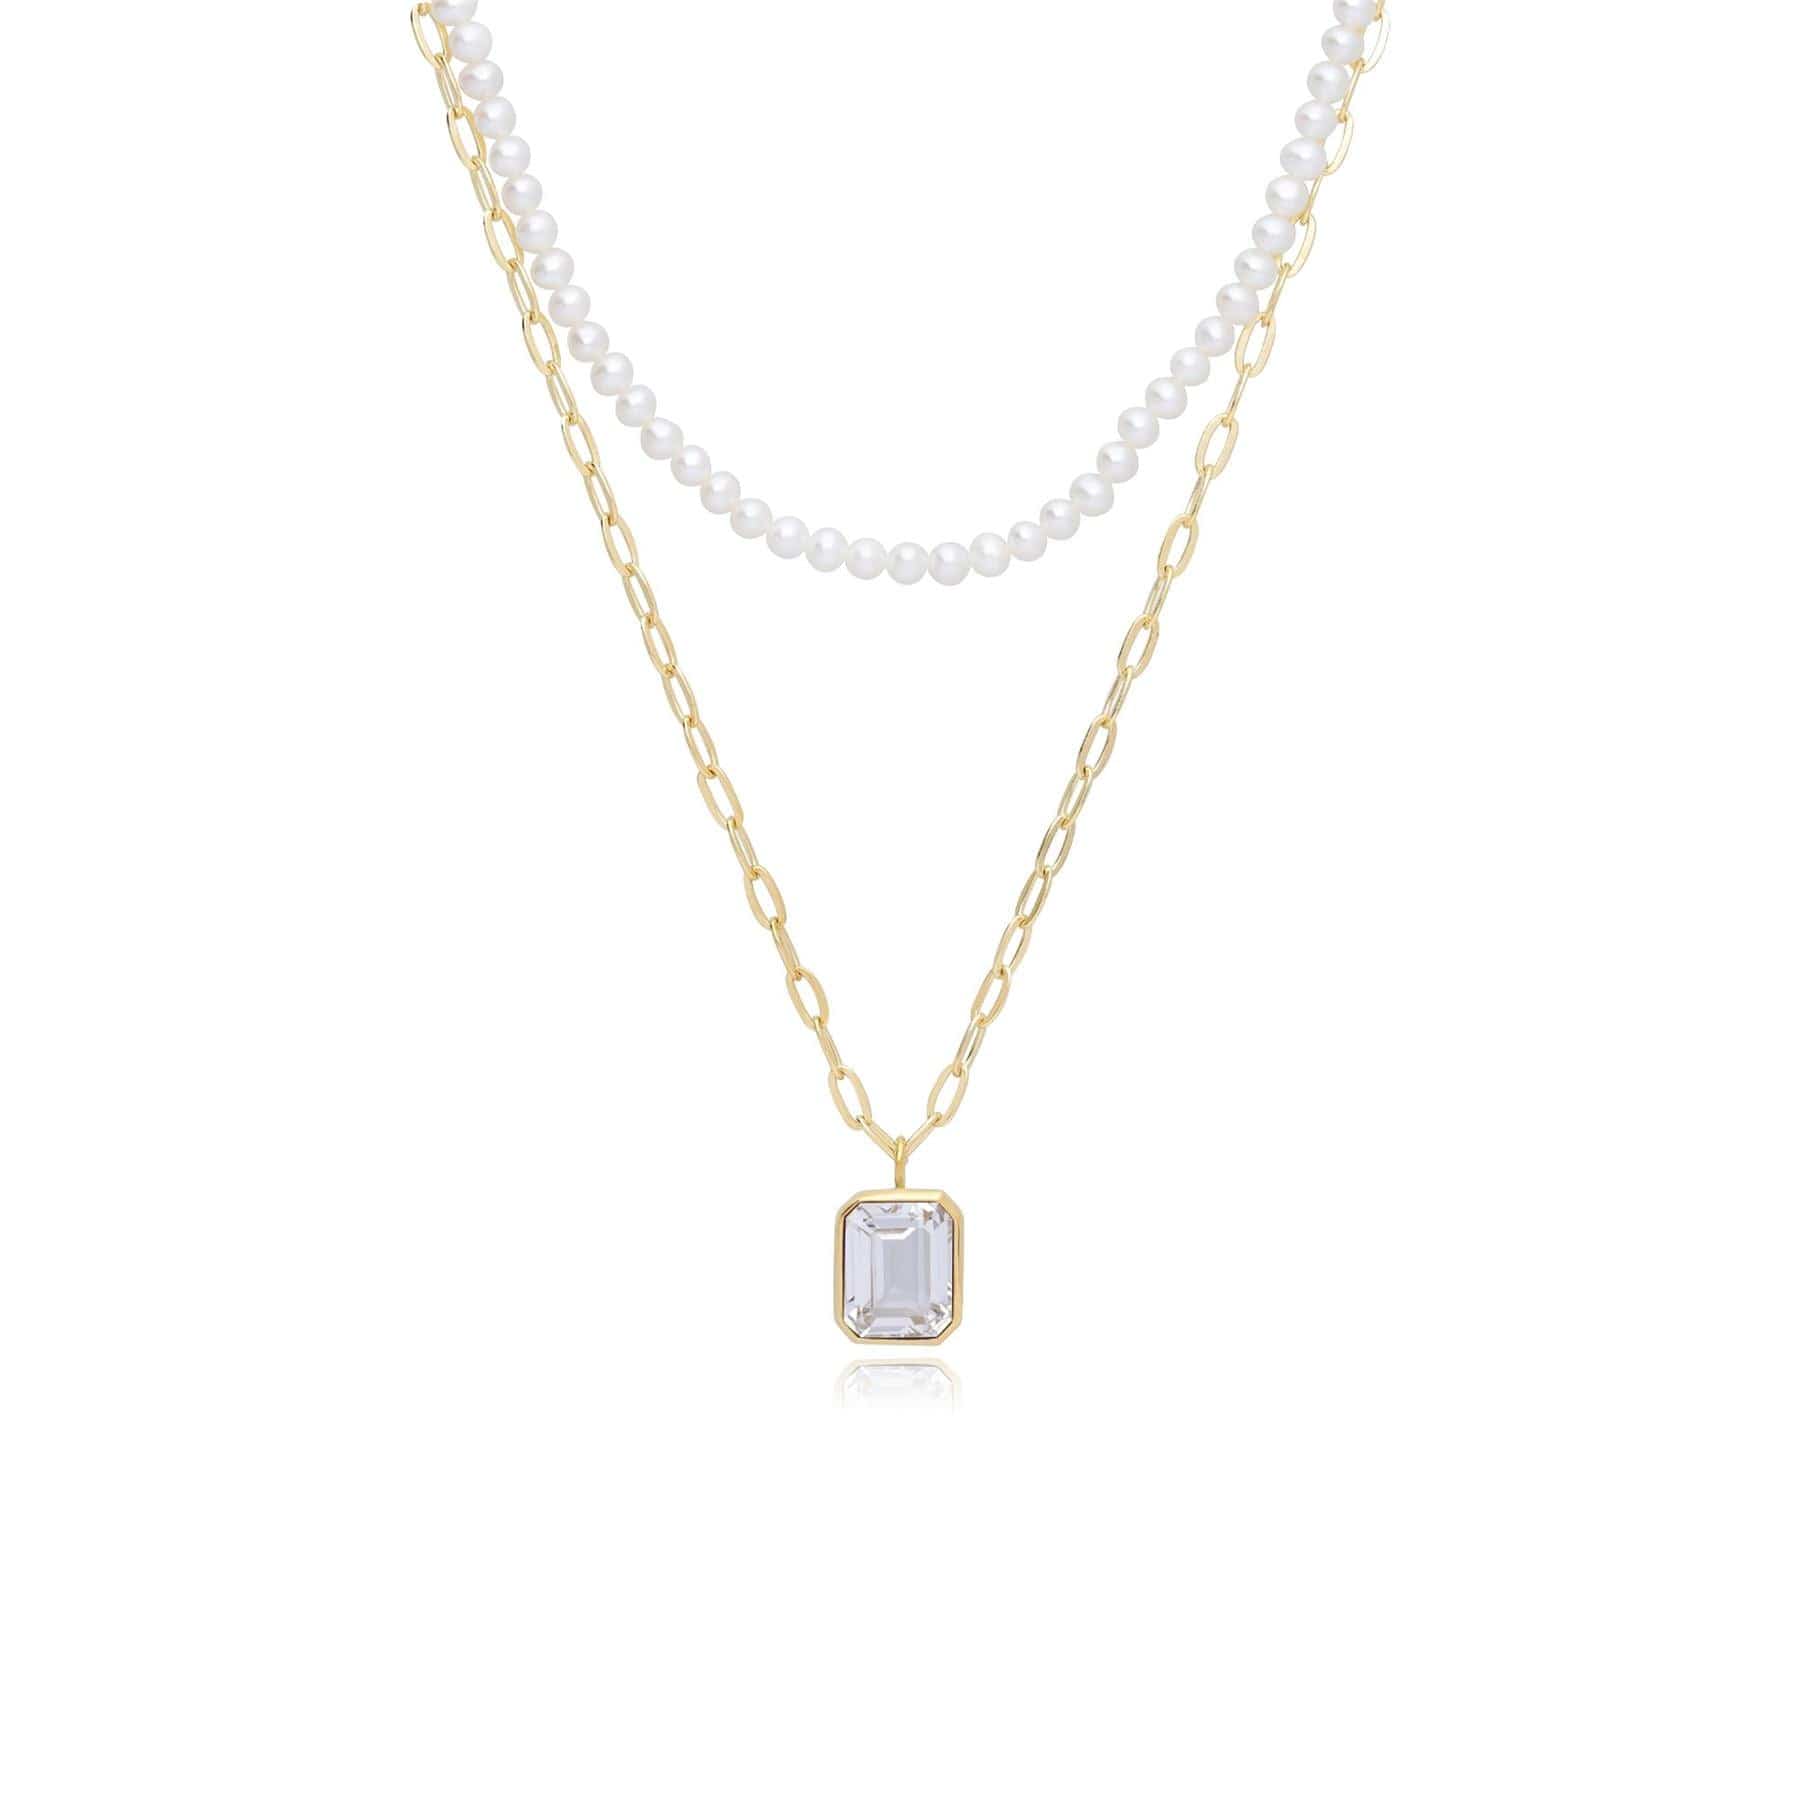 ECFEW™ 'The Unifier' White Topaz & Pearl Layered Necklace